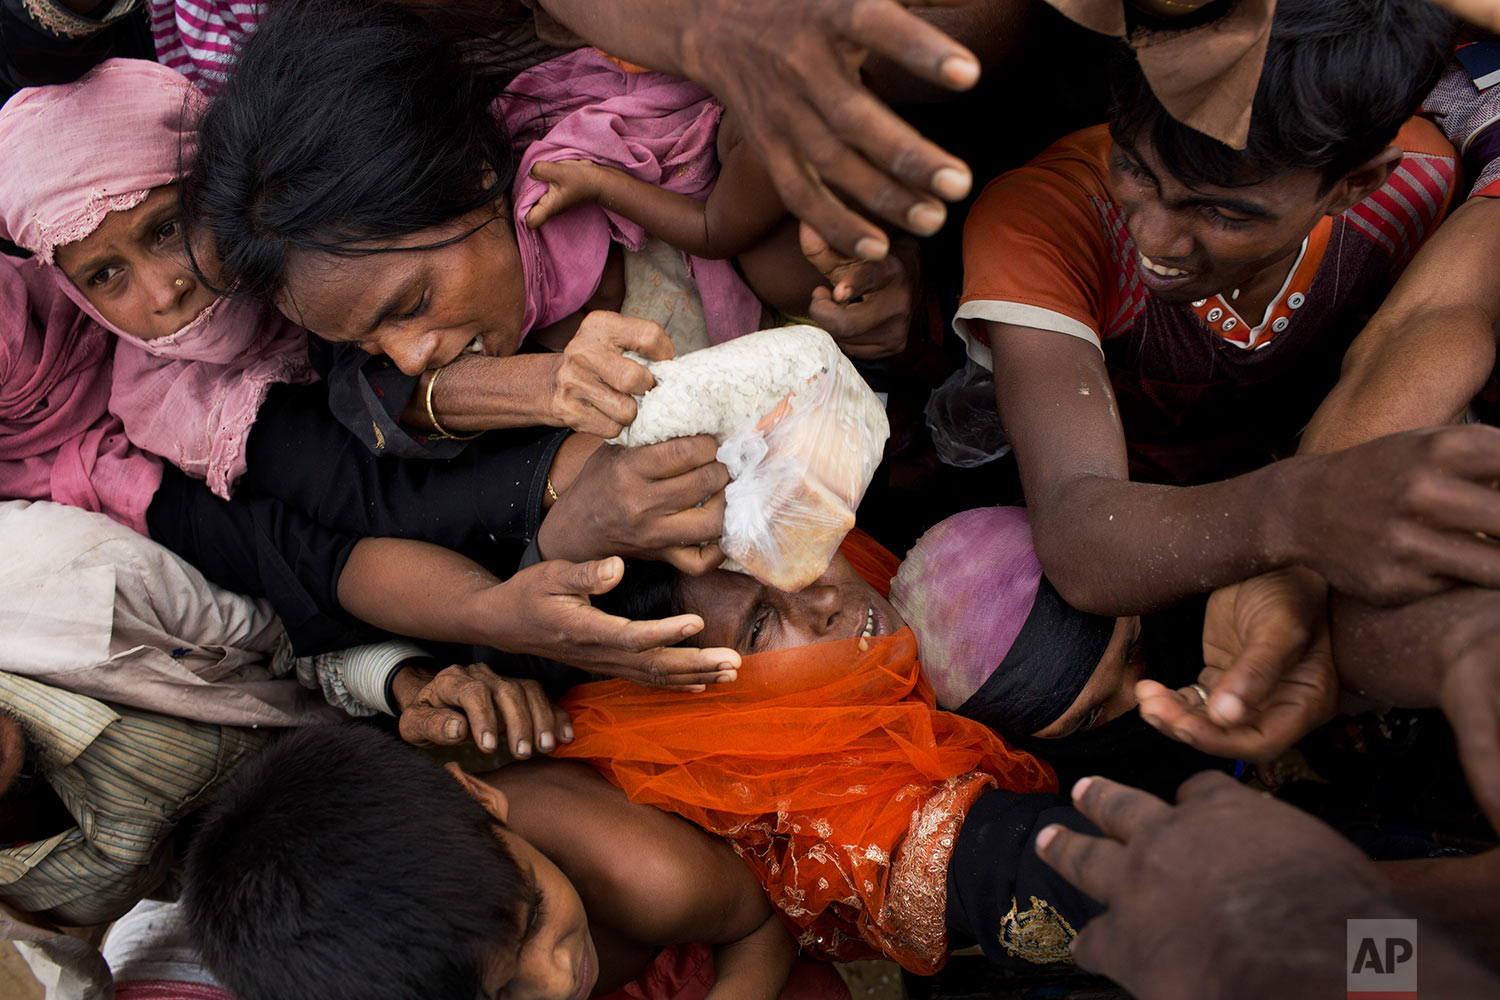  Rohingya Muslims, newly arrived from Myanmar, scuffle for puffed rice food rations donated by local volunteers in Kutupalong, Bangladesh, Saturday, Sept. 9, 2017. (AP Photo/Bernat Armangue) 